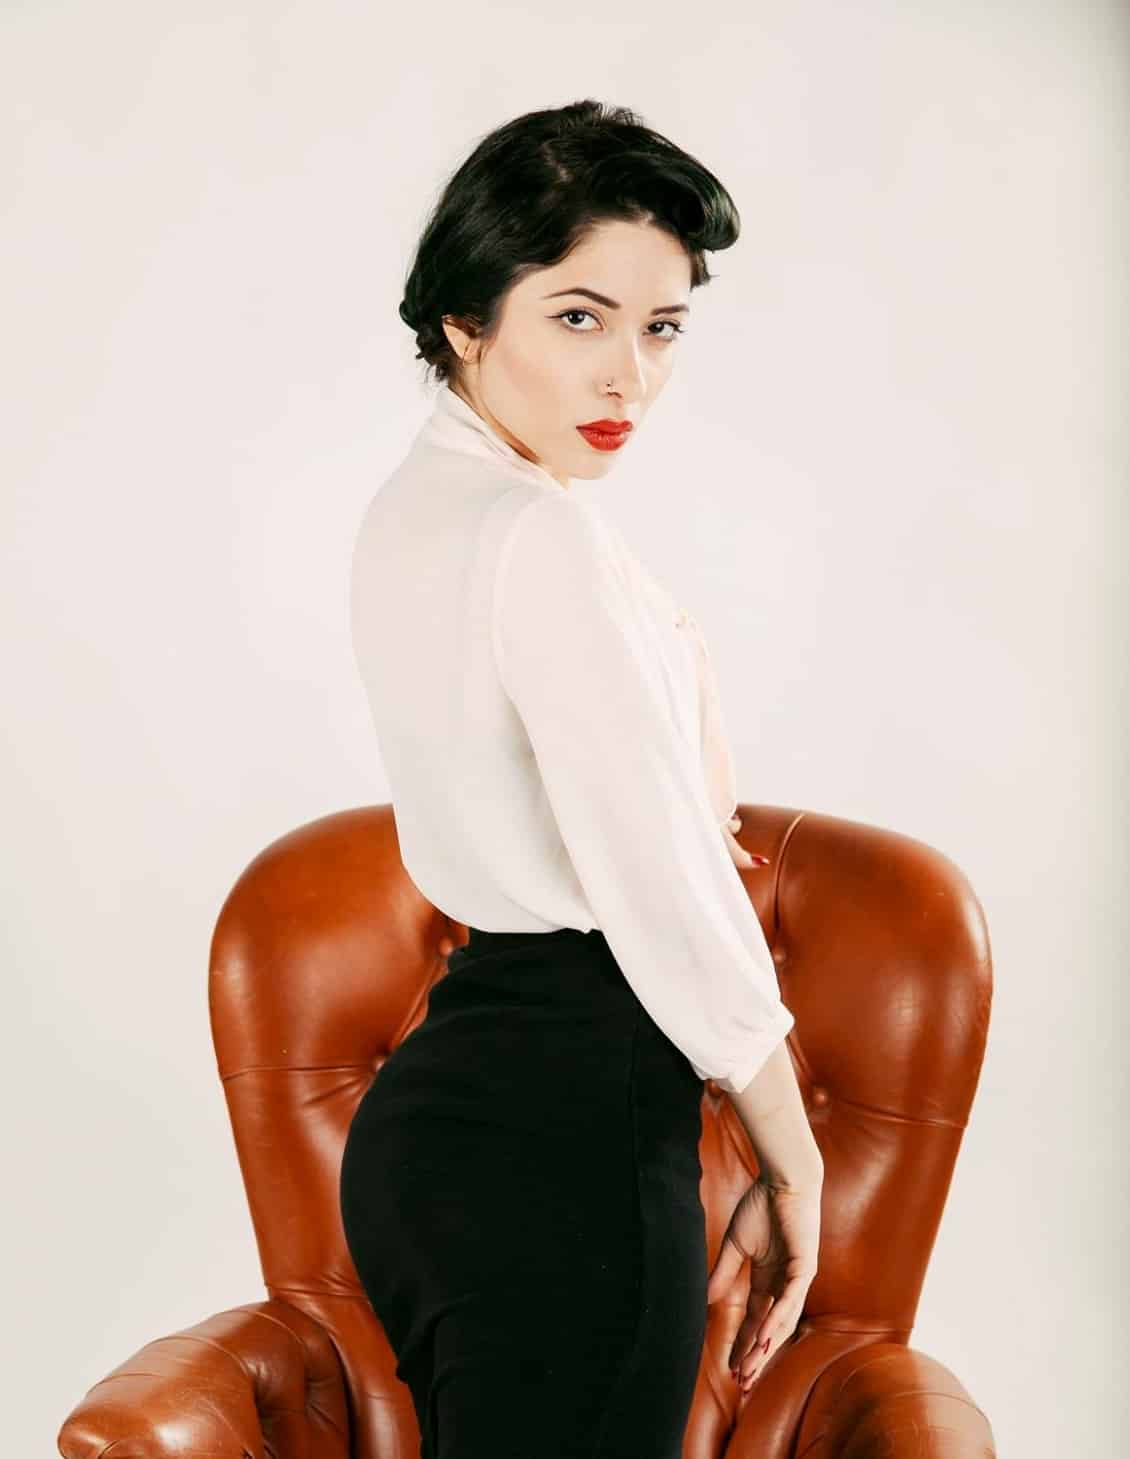 A professional portrait photographer captures the image of a woman in a black skirt and white shirt as she poses conspicuously on a chair.